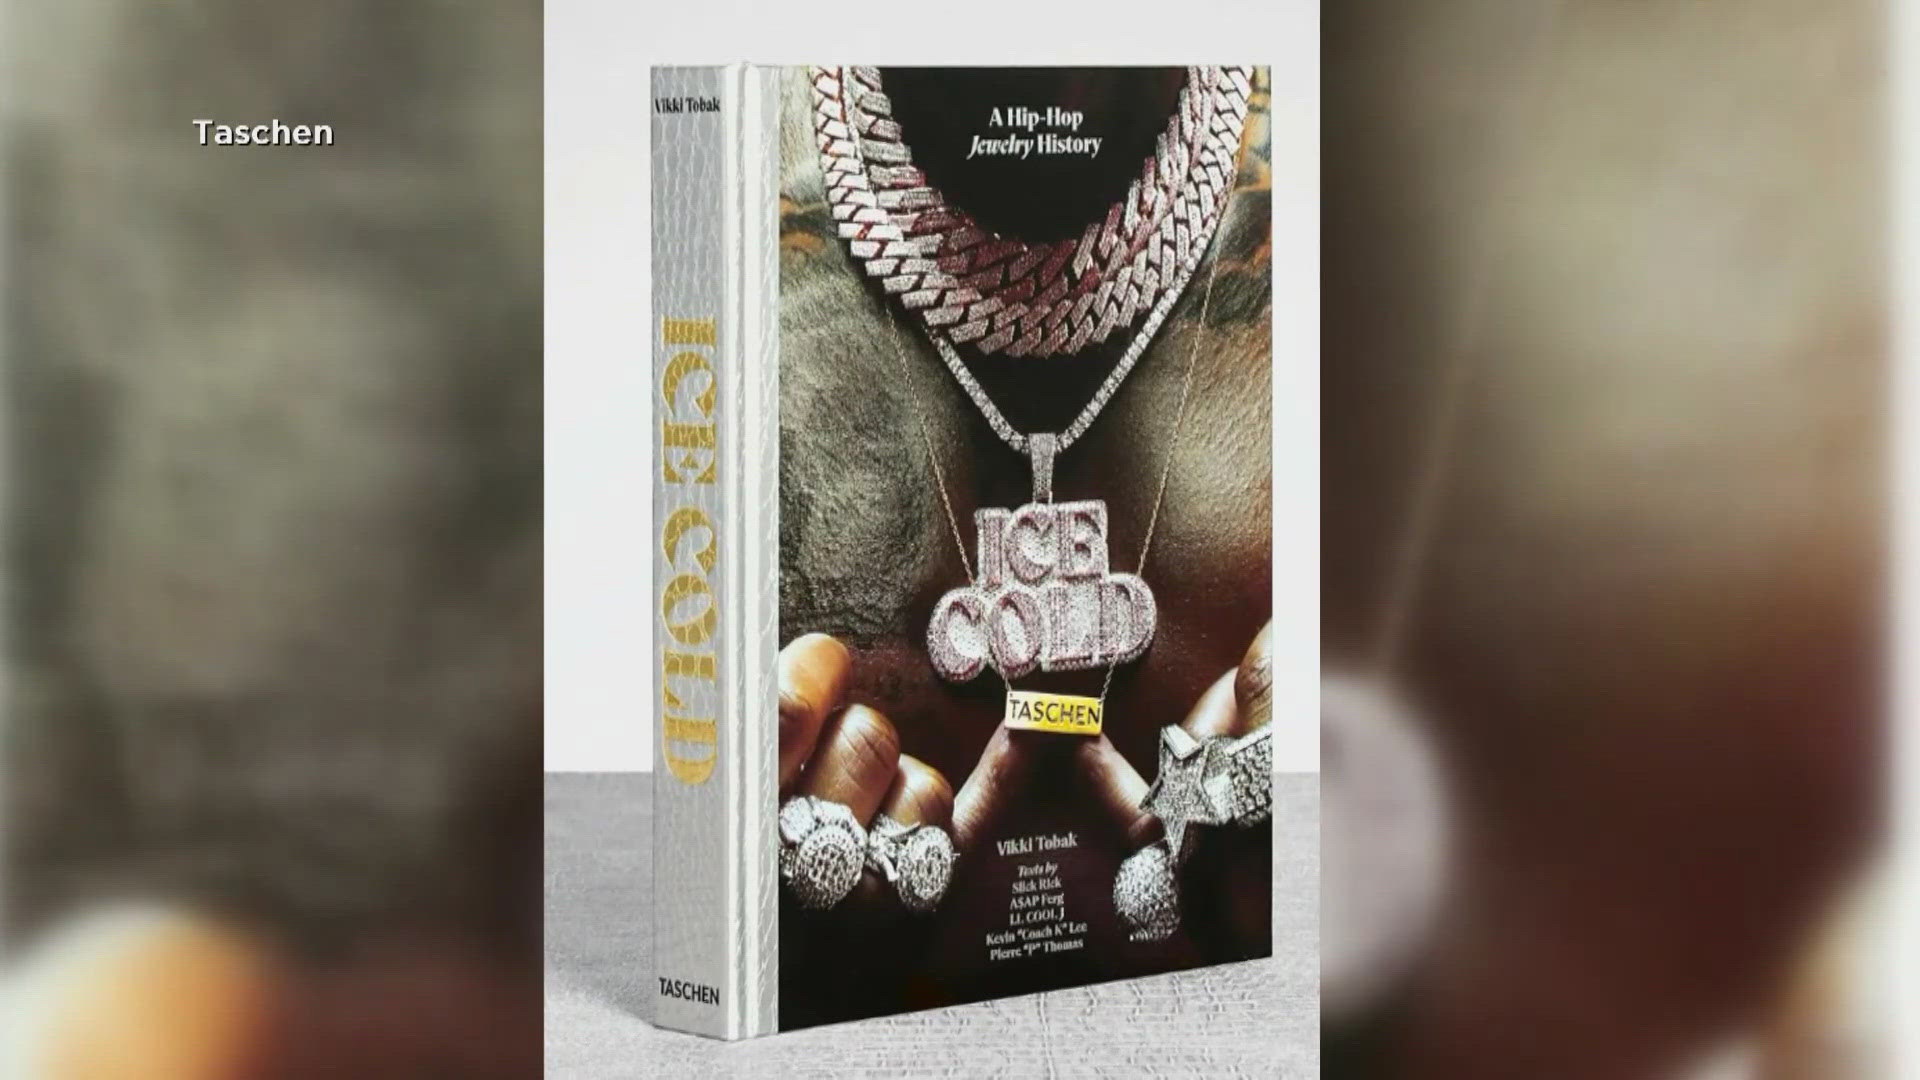 It's called "Ice Cold | A Hip-Hop Jewelry History."